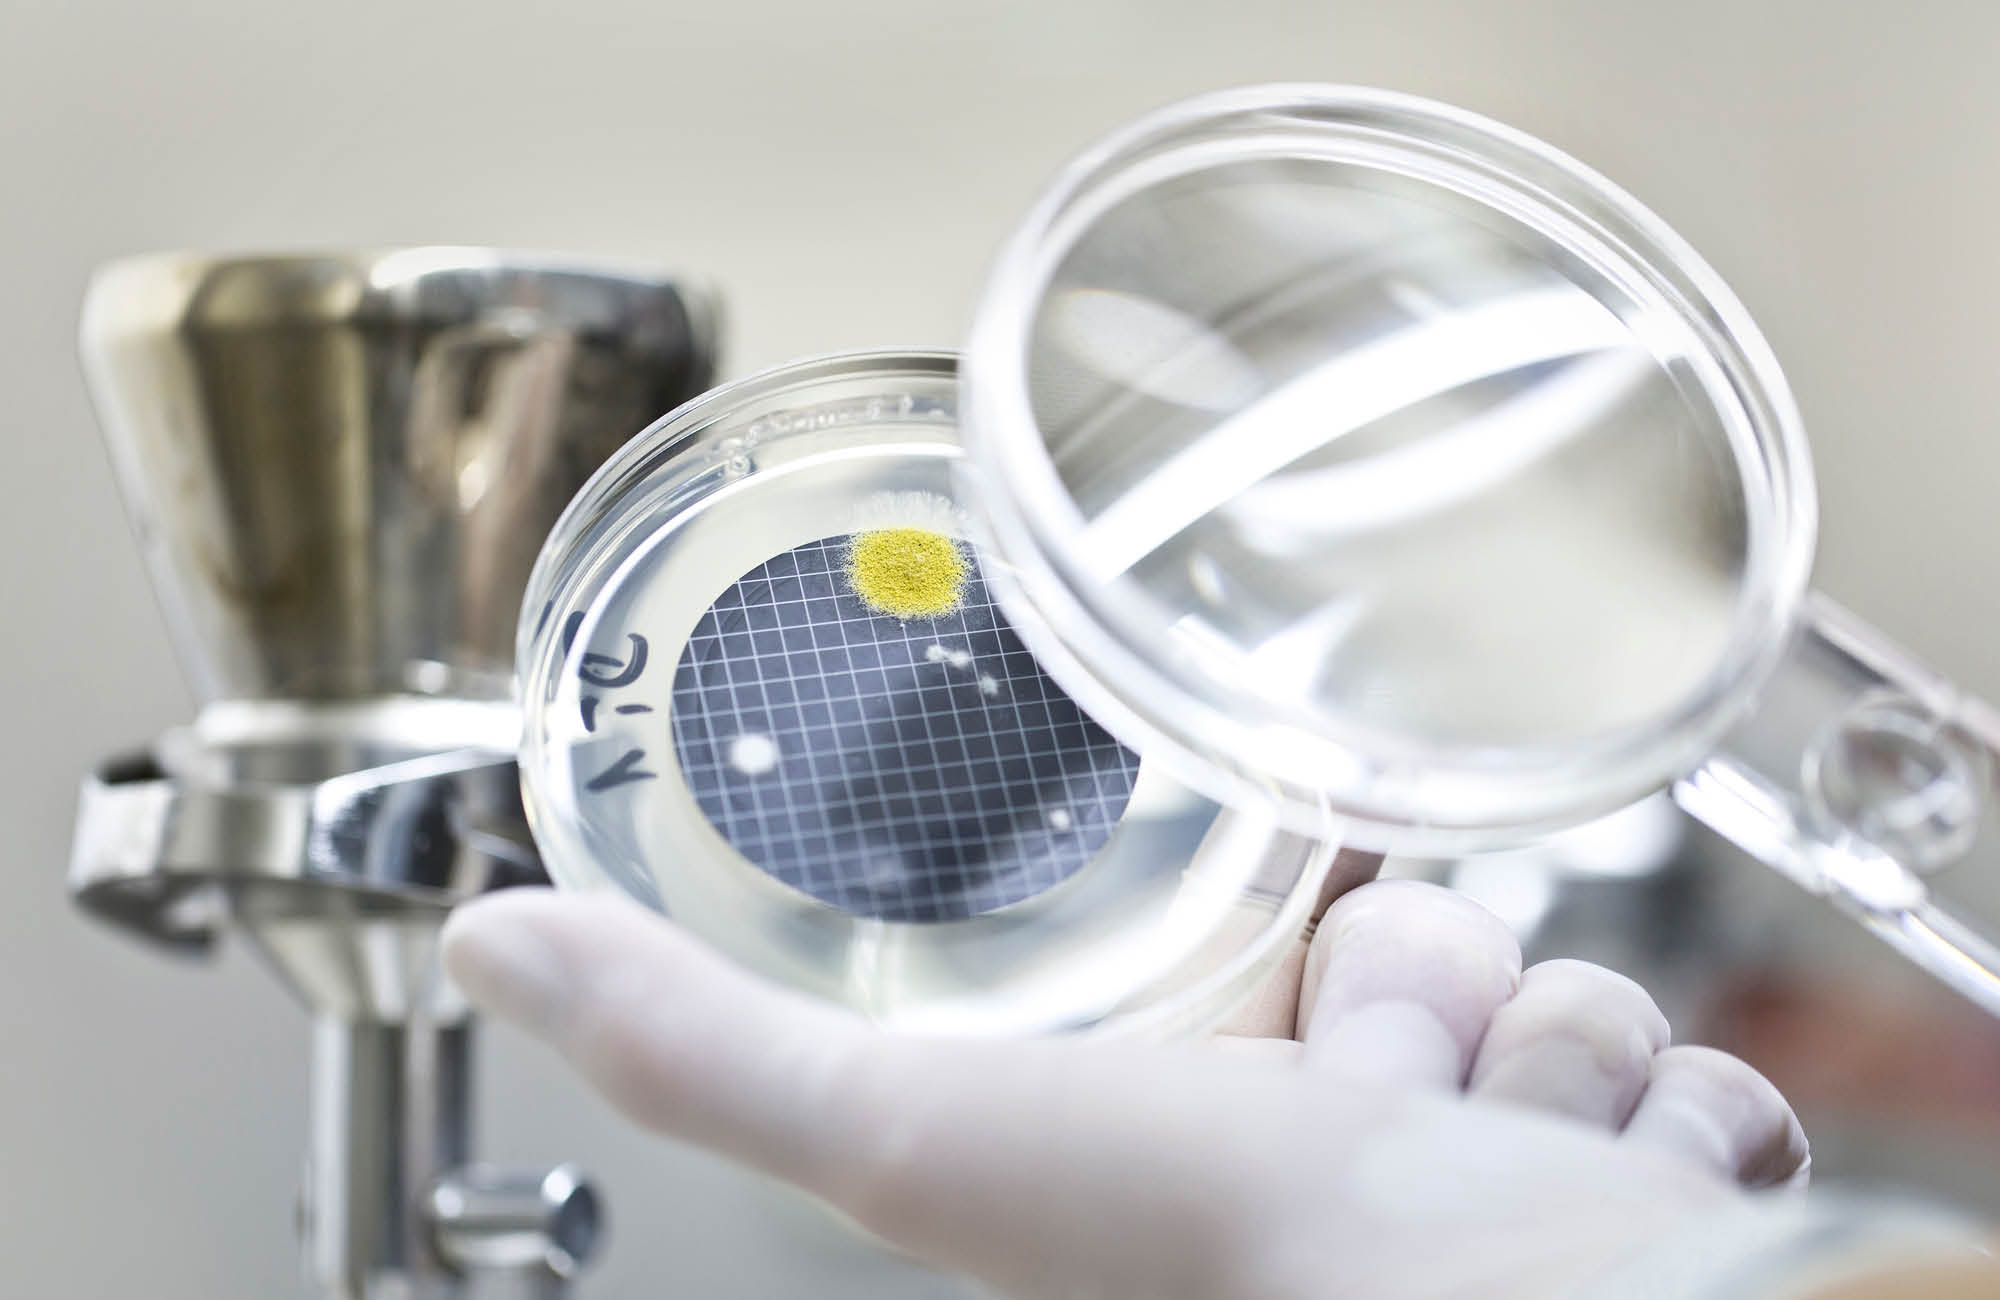 One person checks the petri dish with a magnifying glass